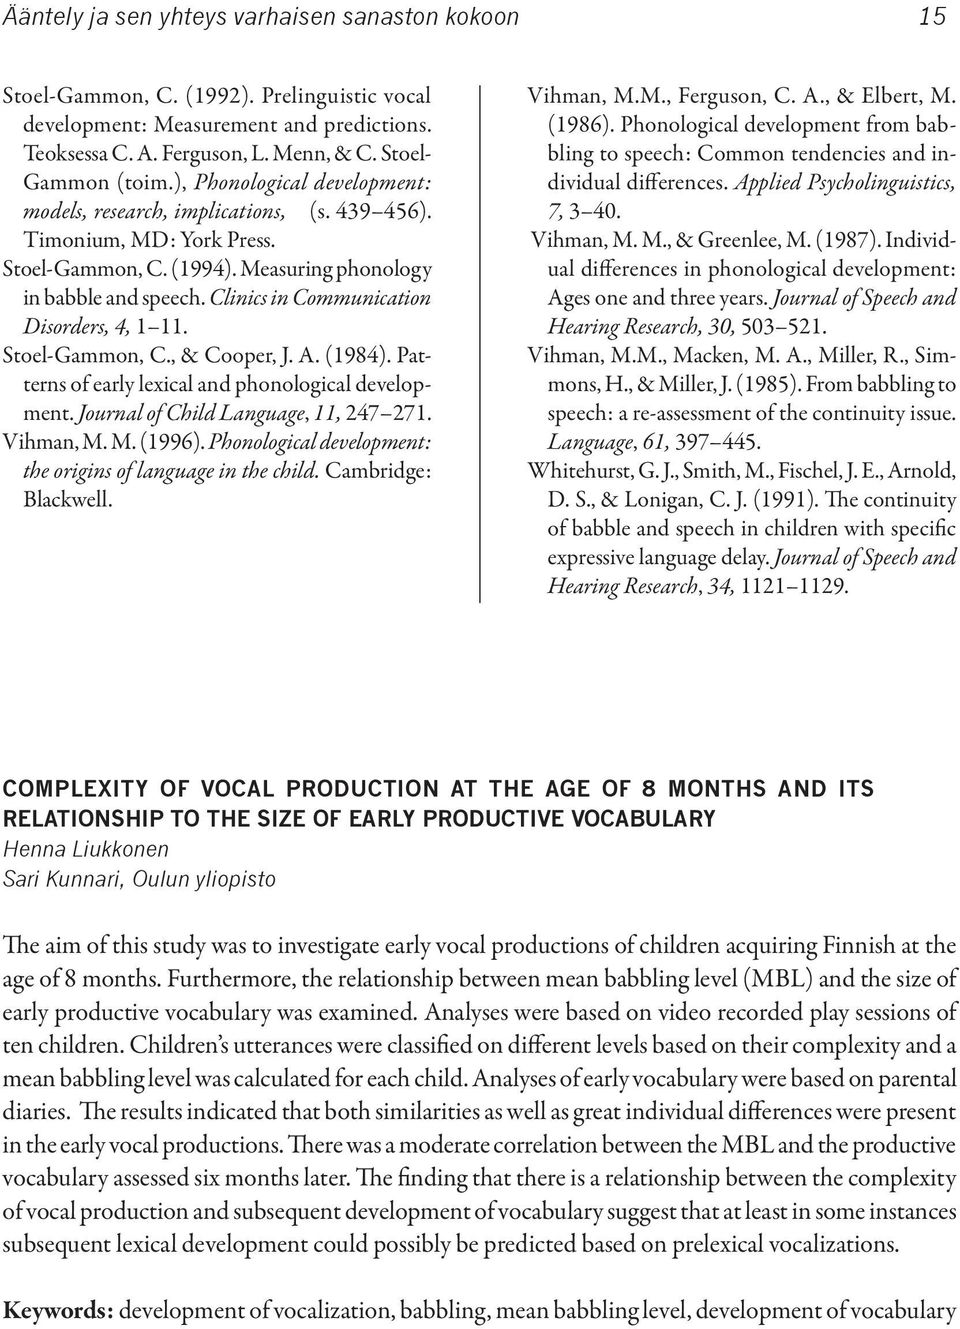 Clinics in Communication Disorders, 4, 1 11. Stoel-Gammon, C., & Cooper, J. A. (1984). Patterns of early lexical and phonological development. Journal of Child Language, 11, 247 271. Vihman, M.